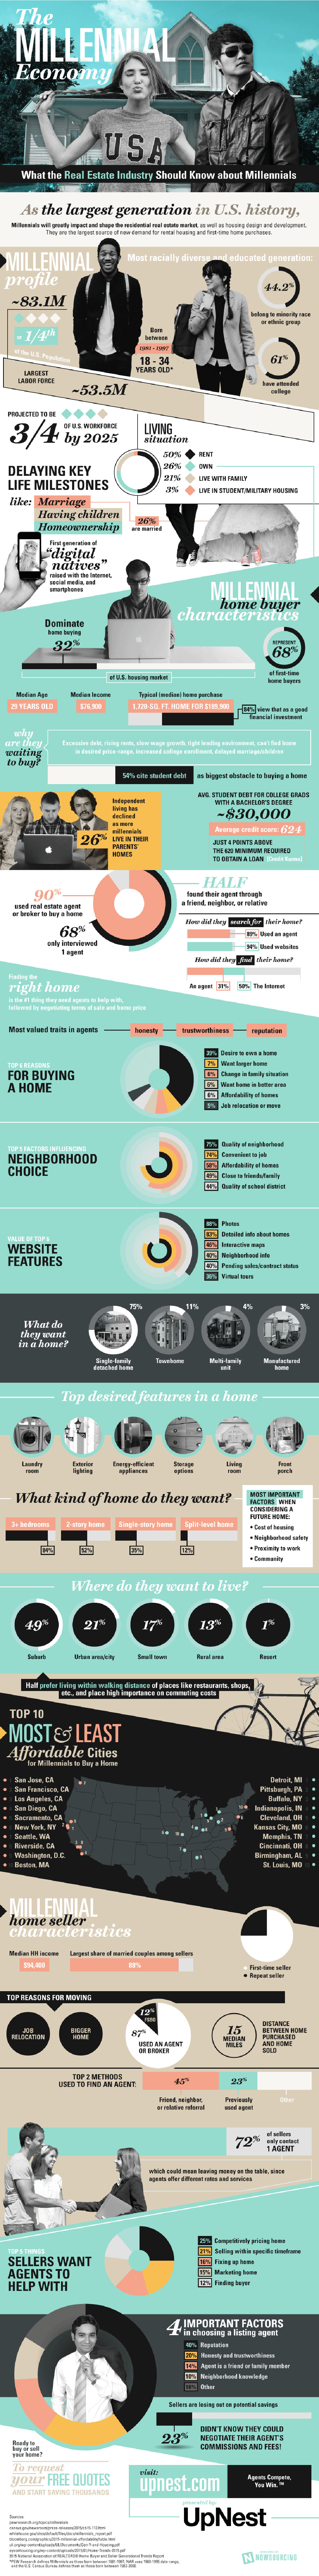 What the Real Estate Industry Needs to Know about Millennials Infographic